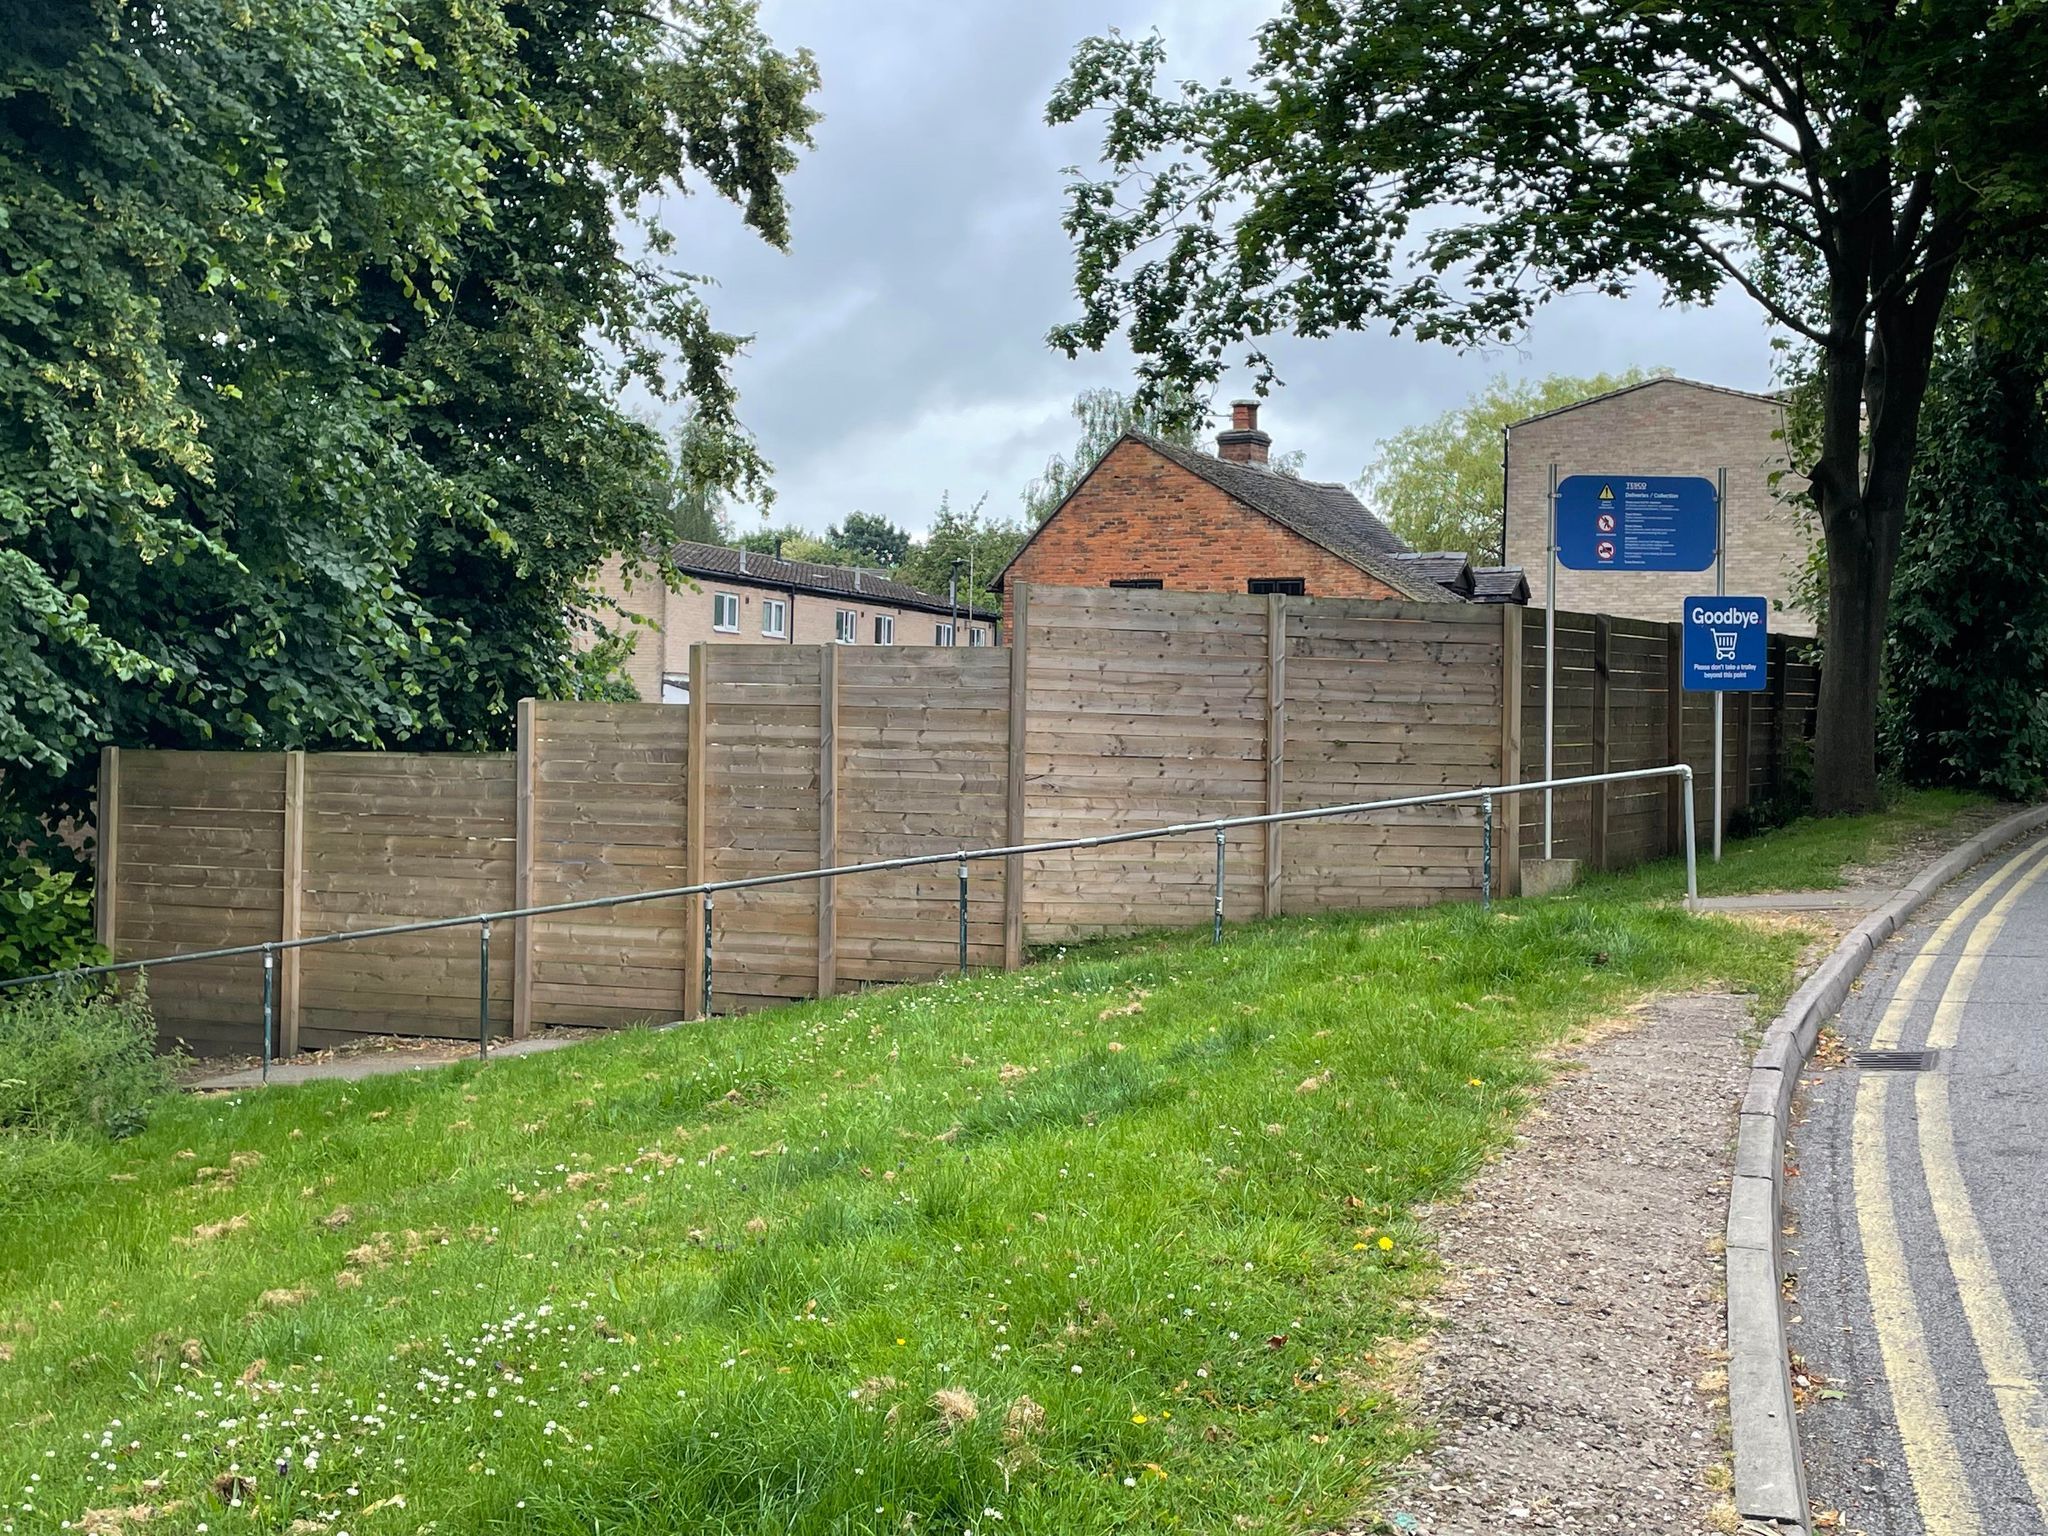 Fencing seen from the Tesco car park